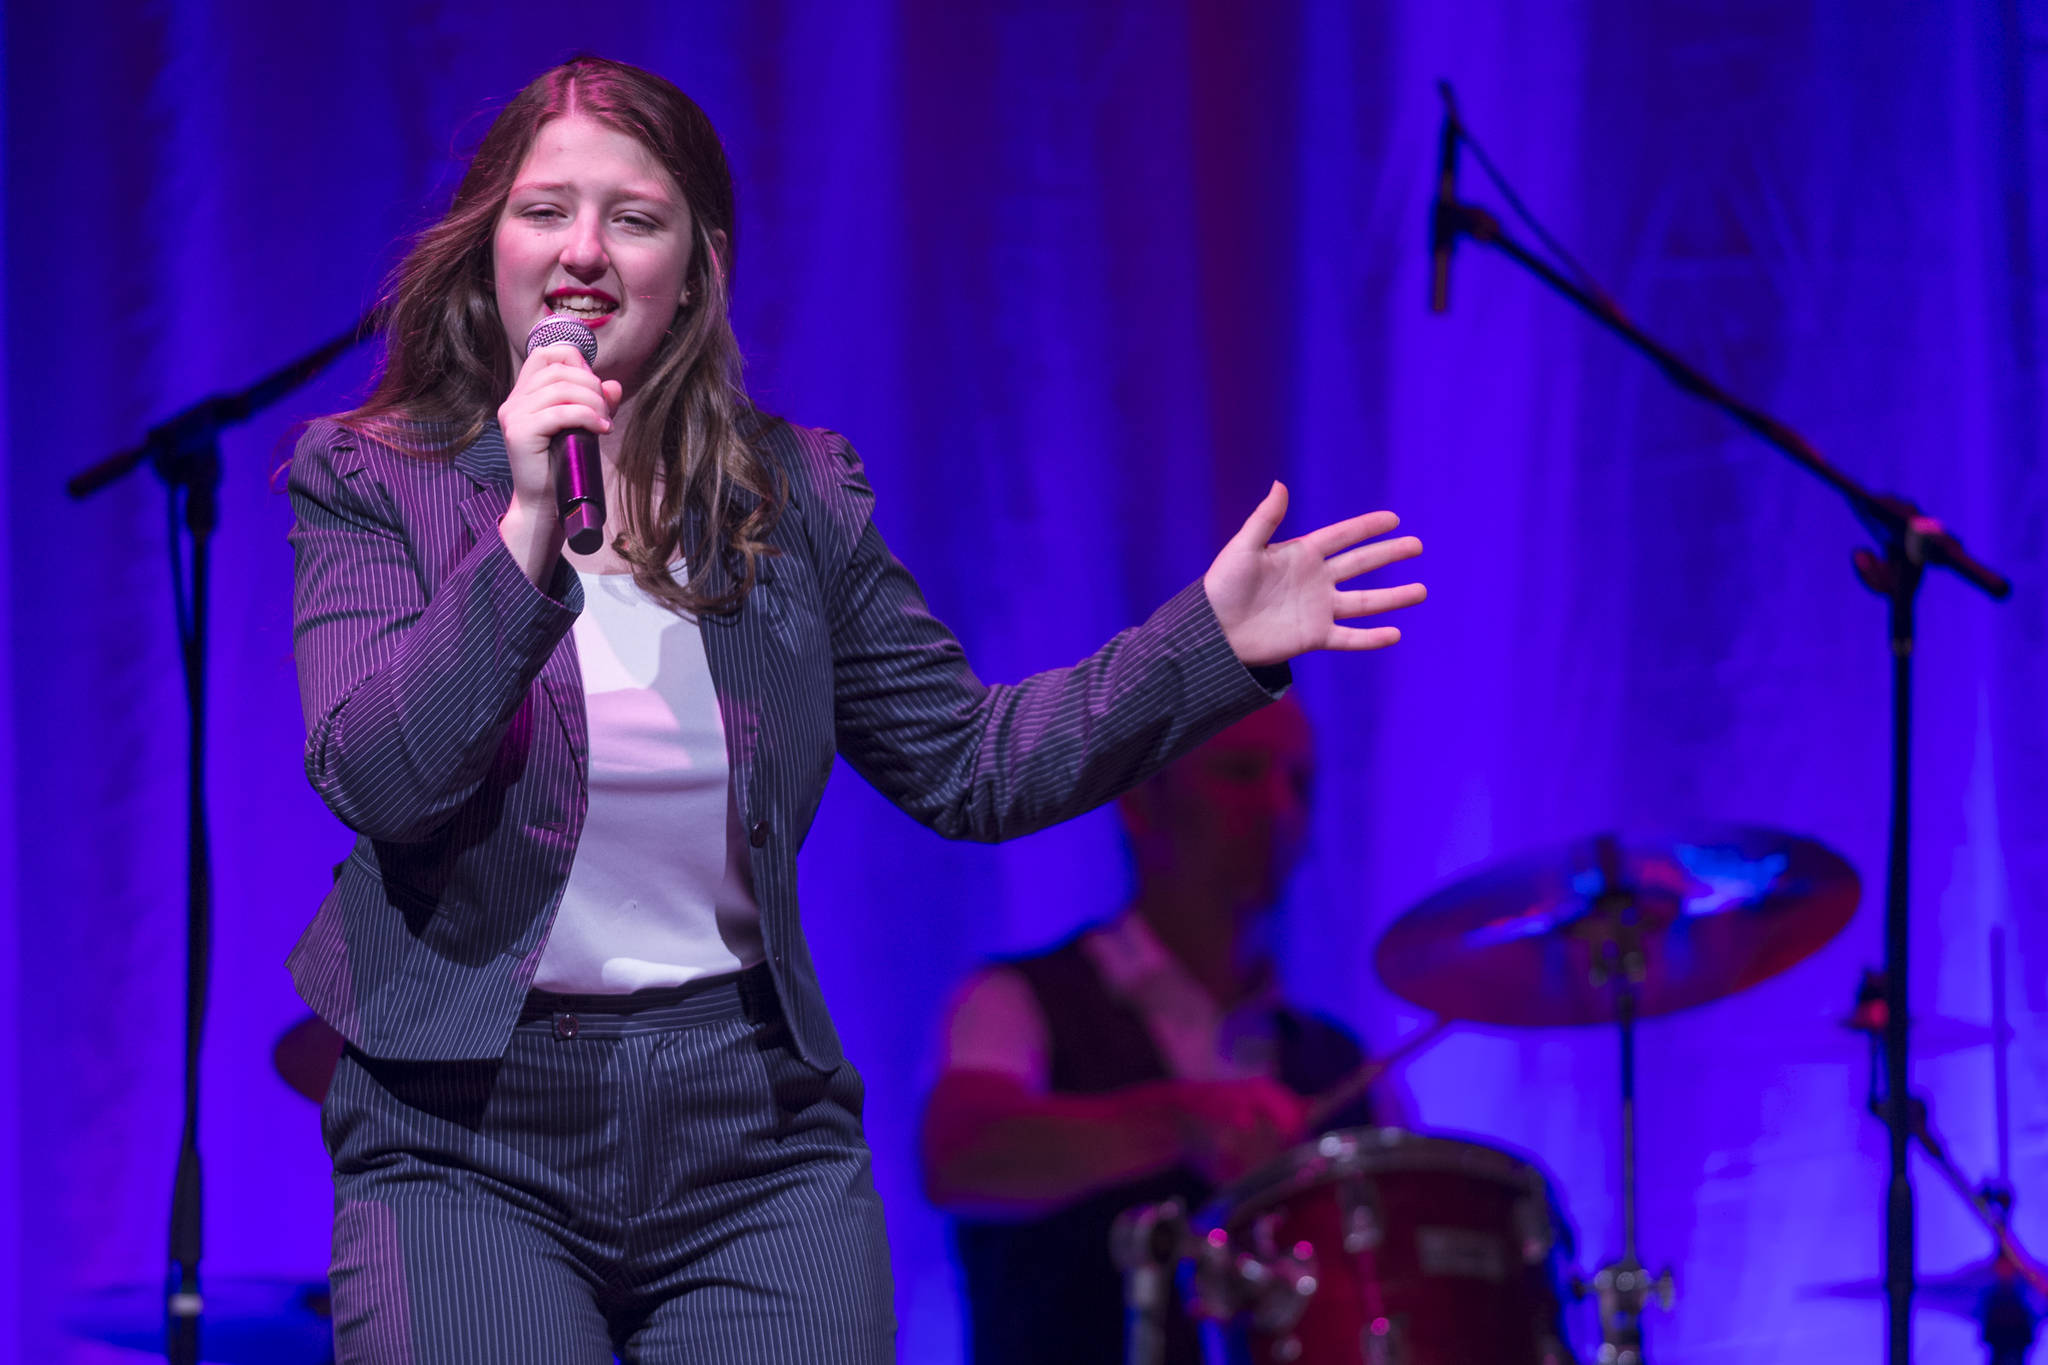 Briannah Letter performs at Juneau Lyric Opera’s production of “Who’s Your Diva?” at Centennial Hall on Saturday, Sept. 29, 2018. (Michael Penn | Juneau Empire)